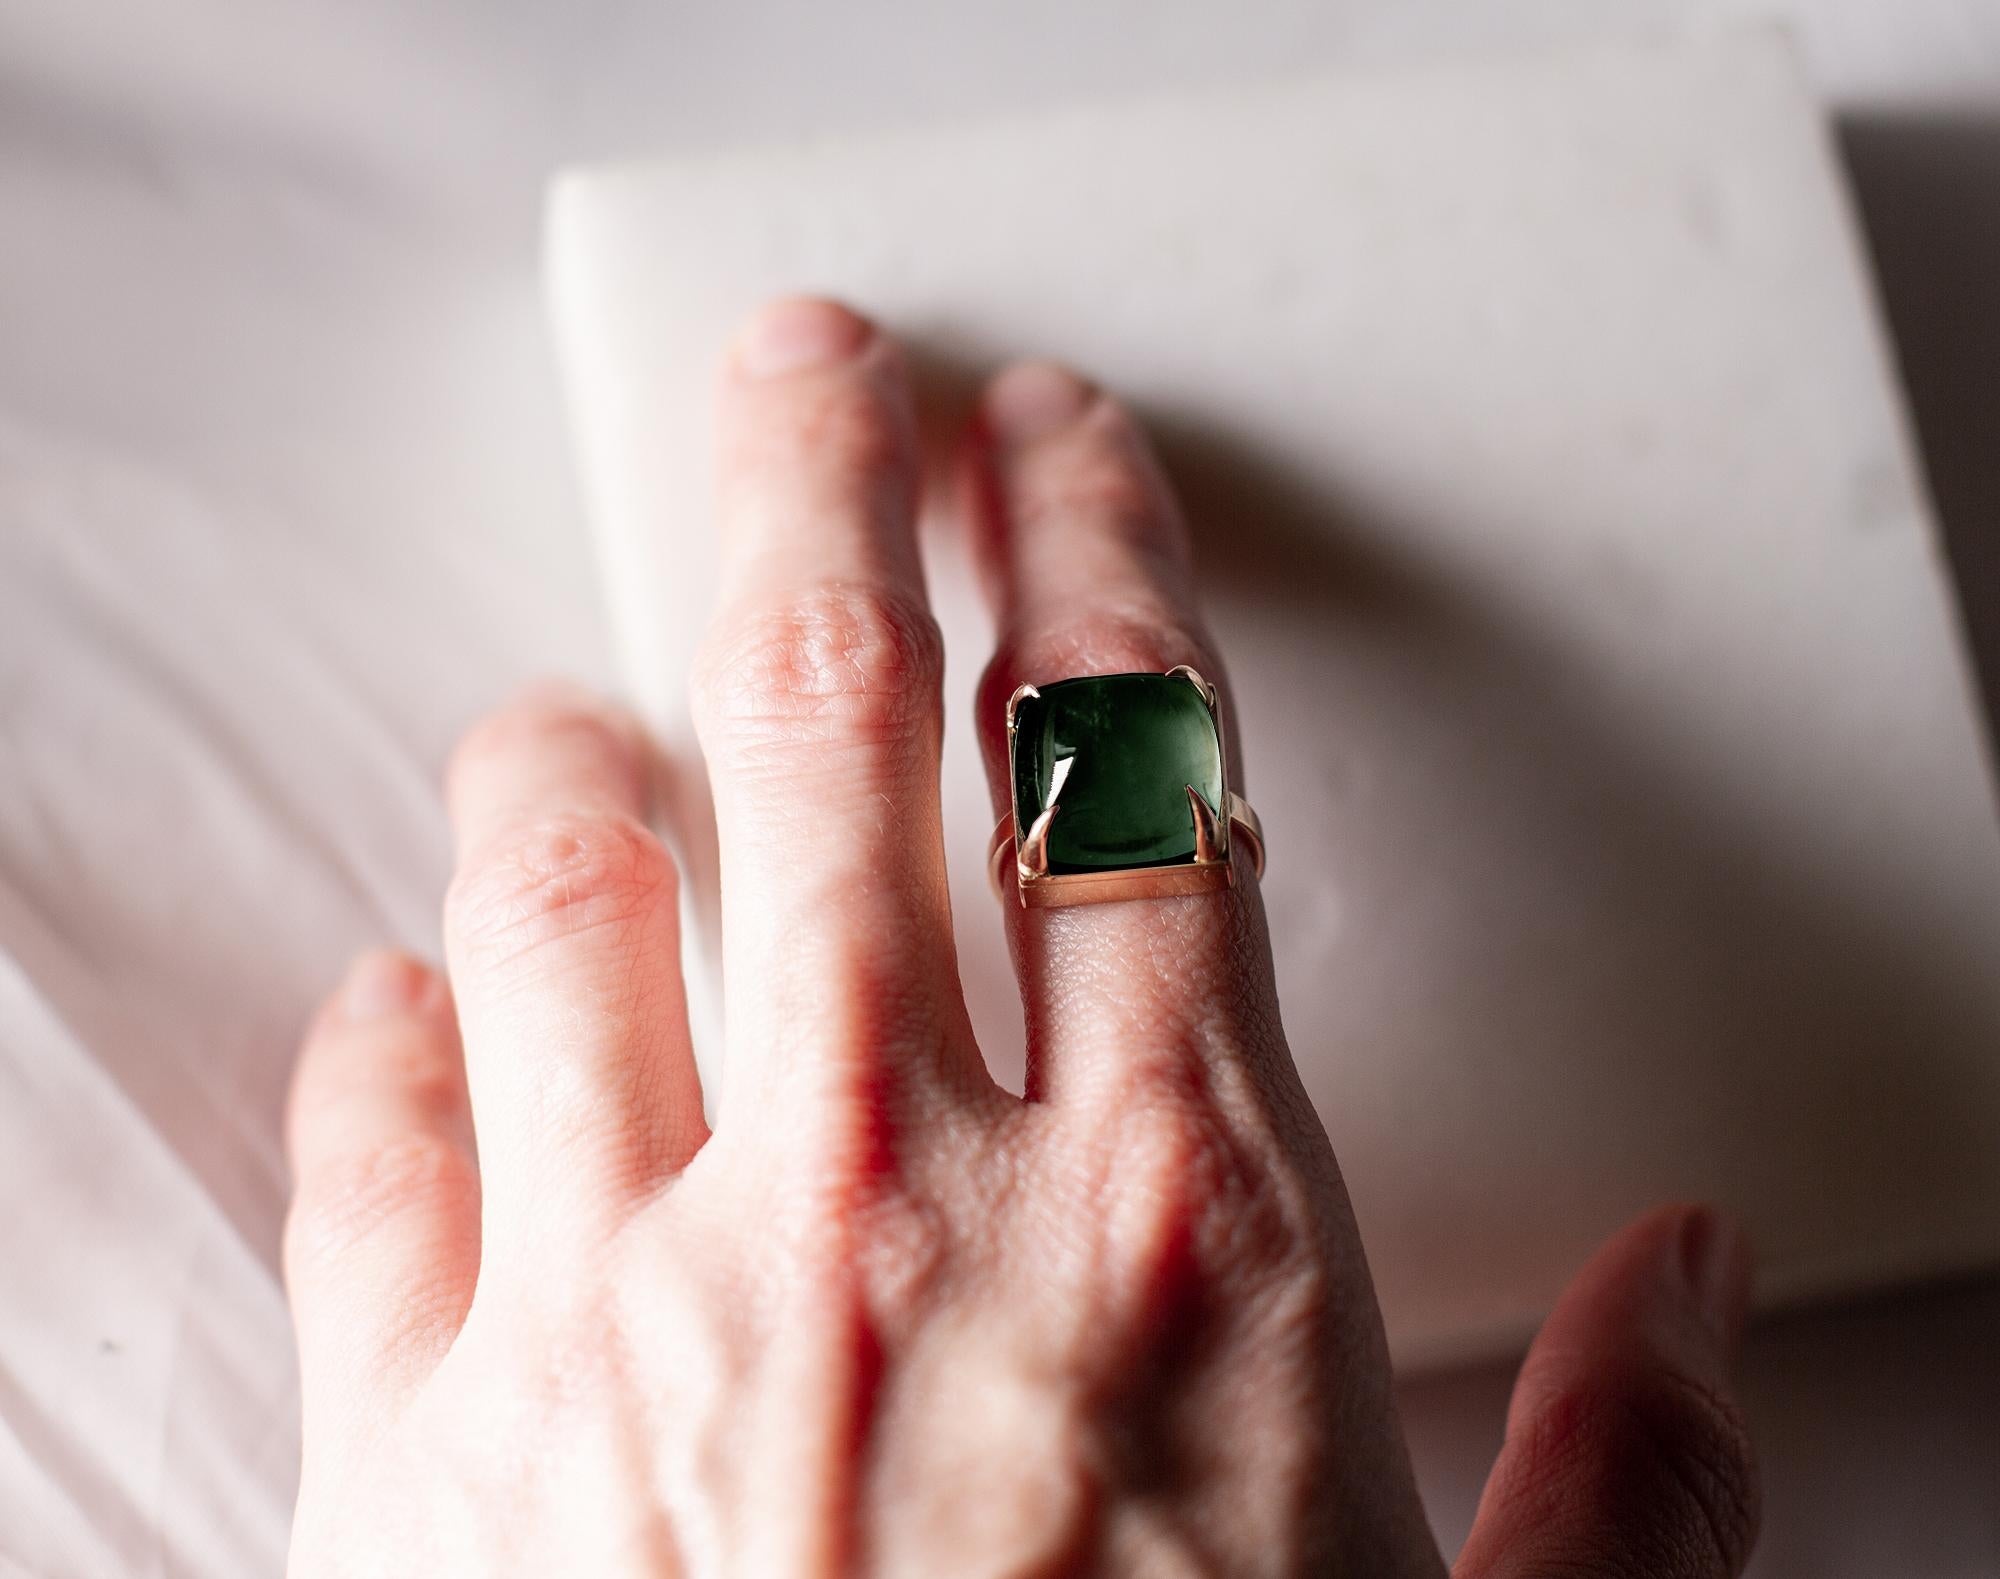 This contemporary engagement ring is made of 18 karat rose gold with sugarloaf cut natural green tourmaline (10,67 carats, 11,5 mm/0,45 inches). 

When for most of the gem it works the way: the smaller prongs the better. This is the shape and size